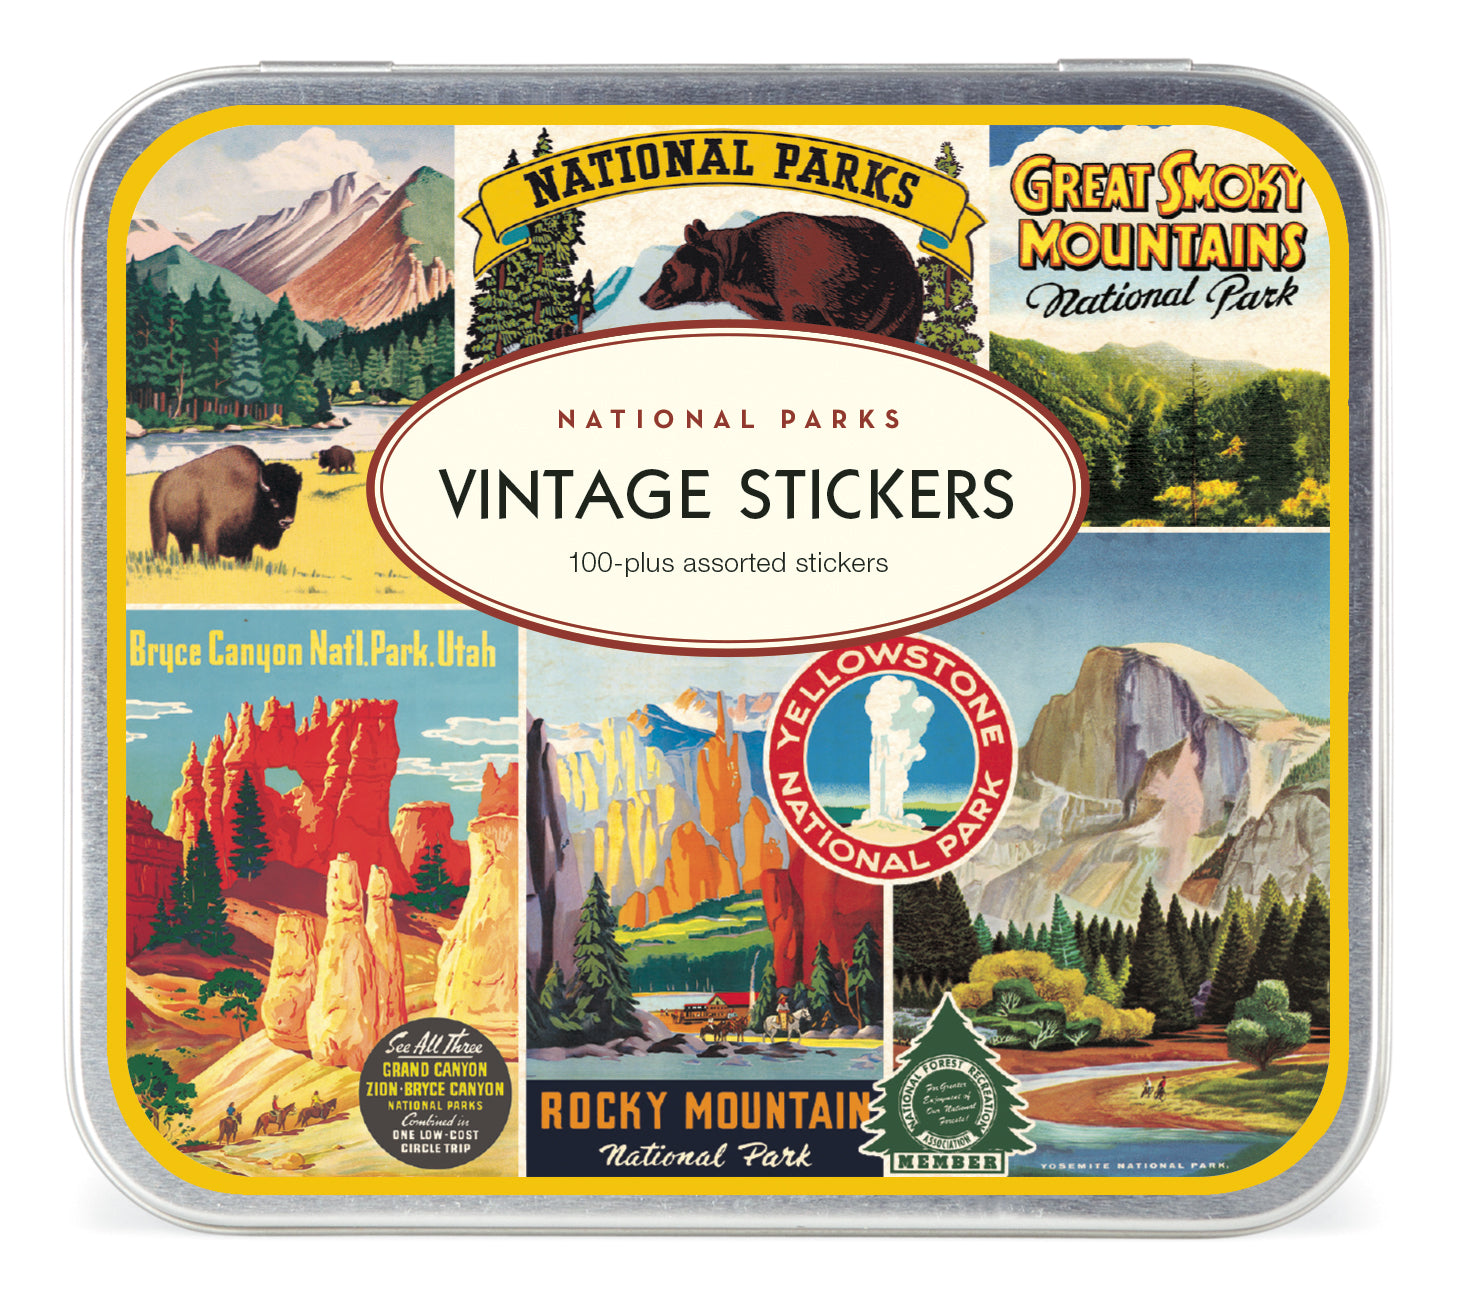 National Parks 5.25&quot; x 4.75&quot; tin containing a curated collection of vintage-inspired stickers featuring images from the Cavallini archives.